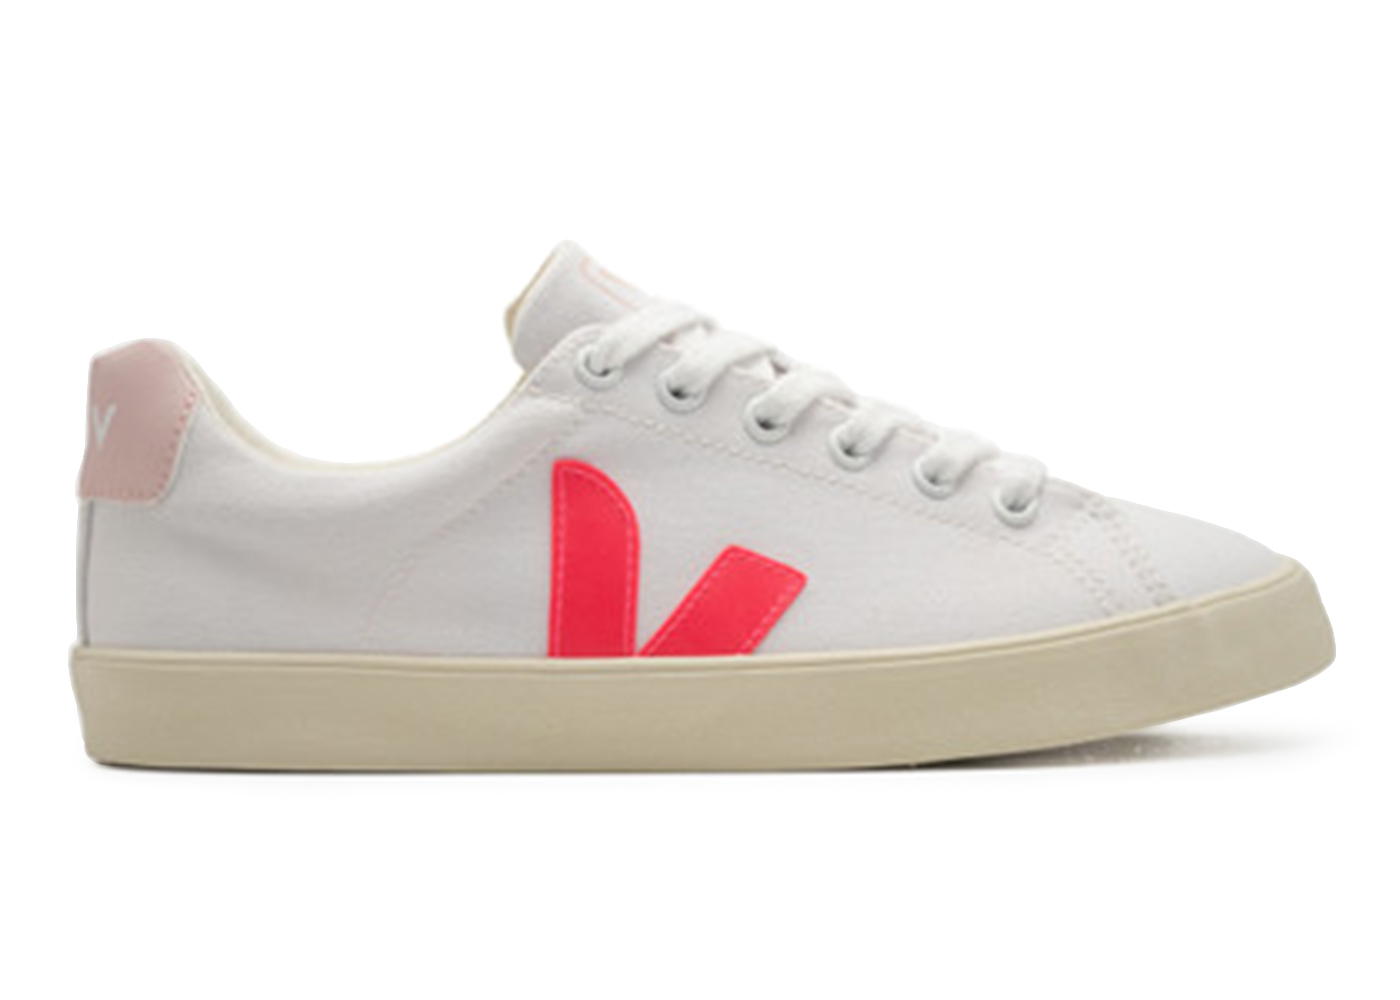 Buy Veja Shoes & New Sneakers - StockX